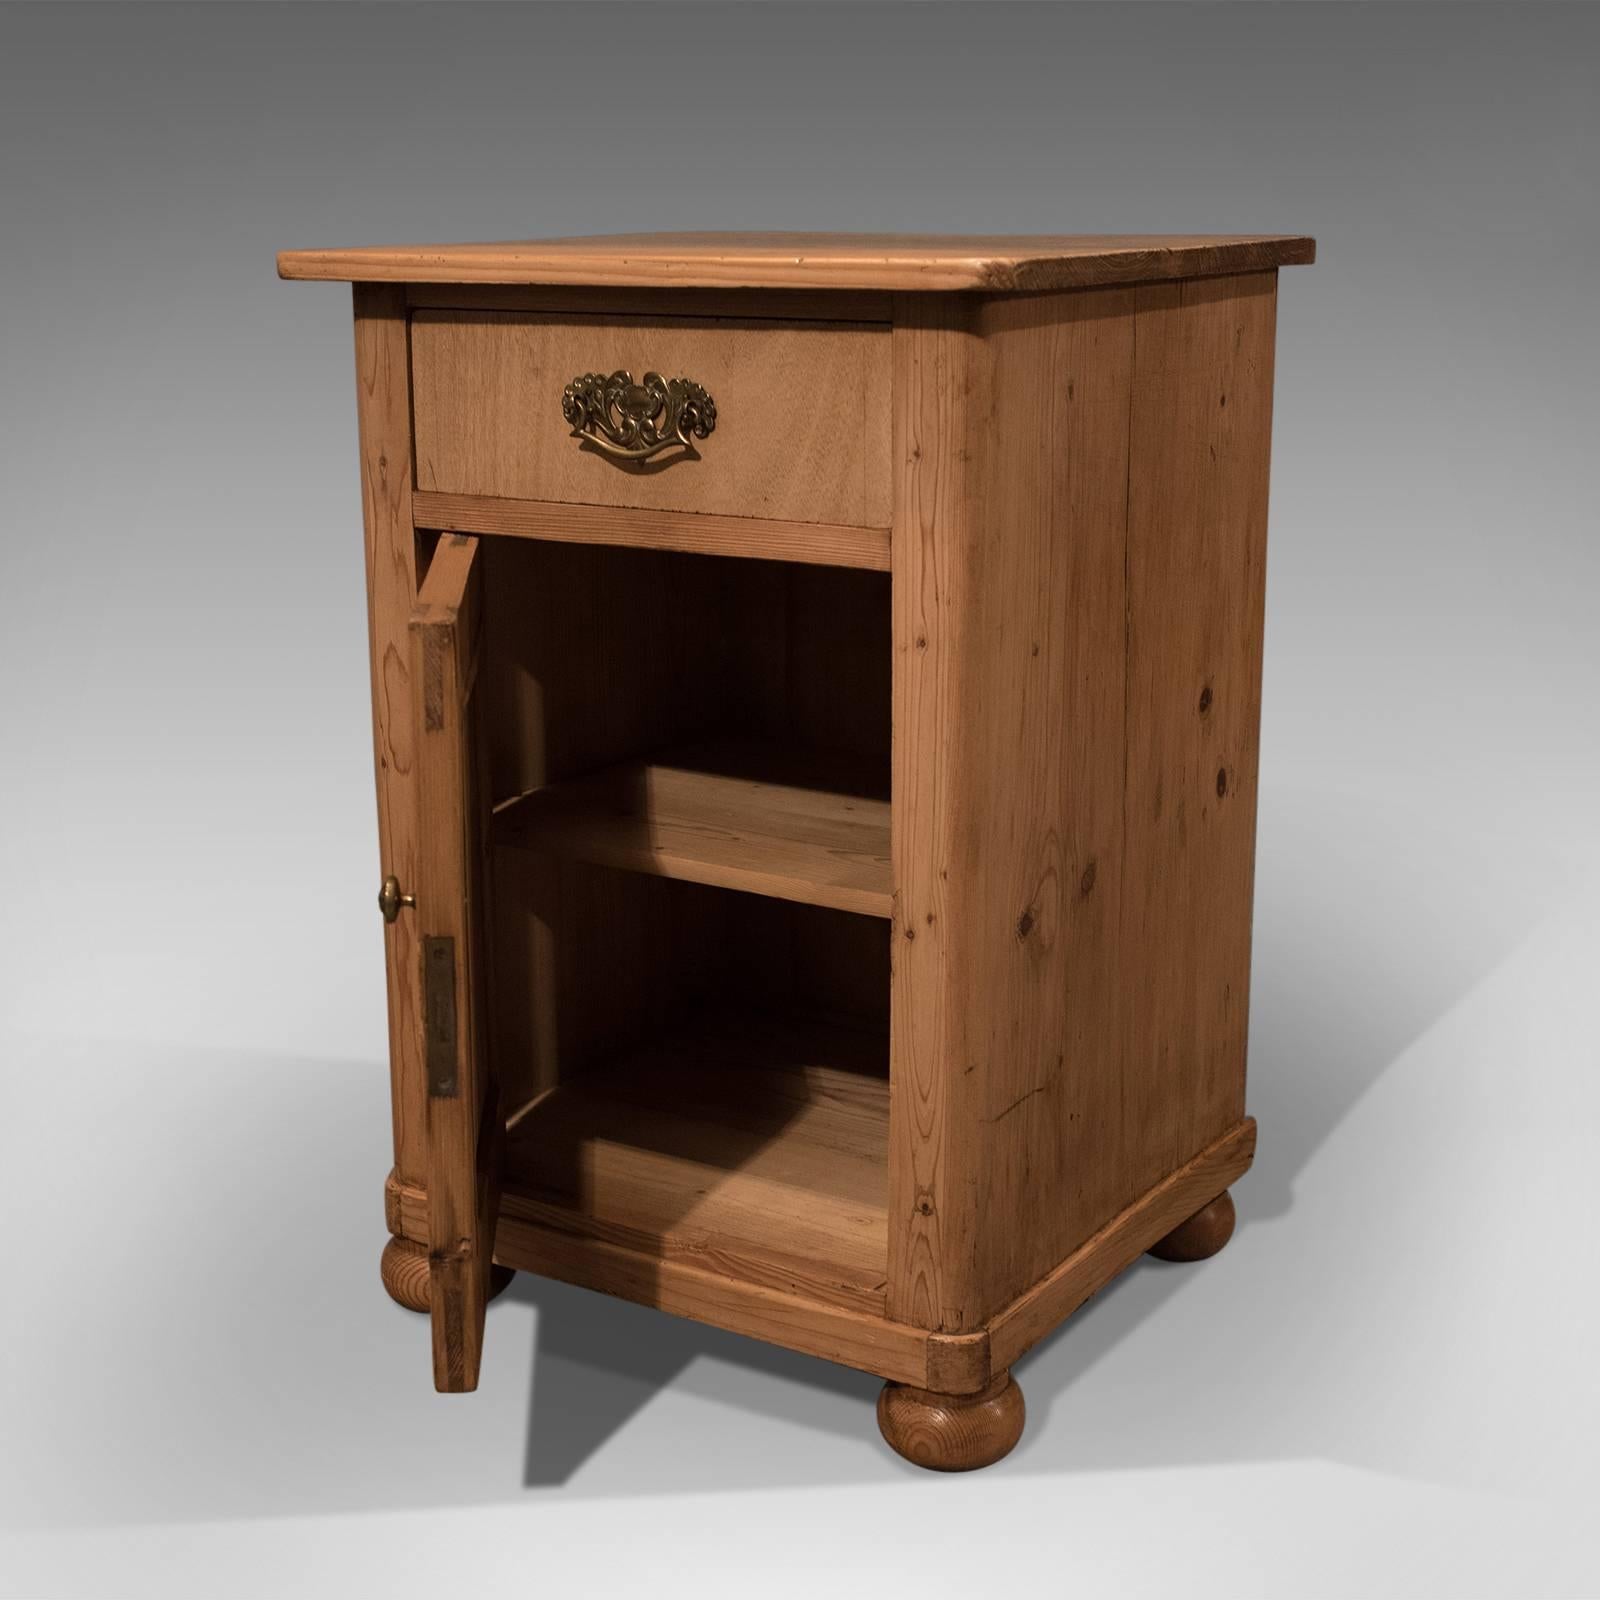 Great Britain (UK) Compact Cabinet or Bedside Cupboard, Victorian Pine, circa 1900